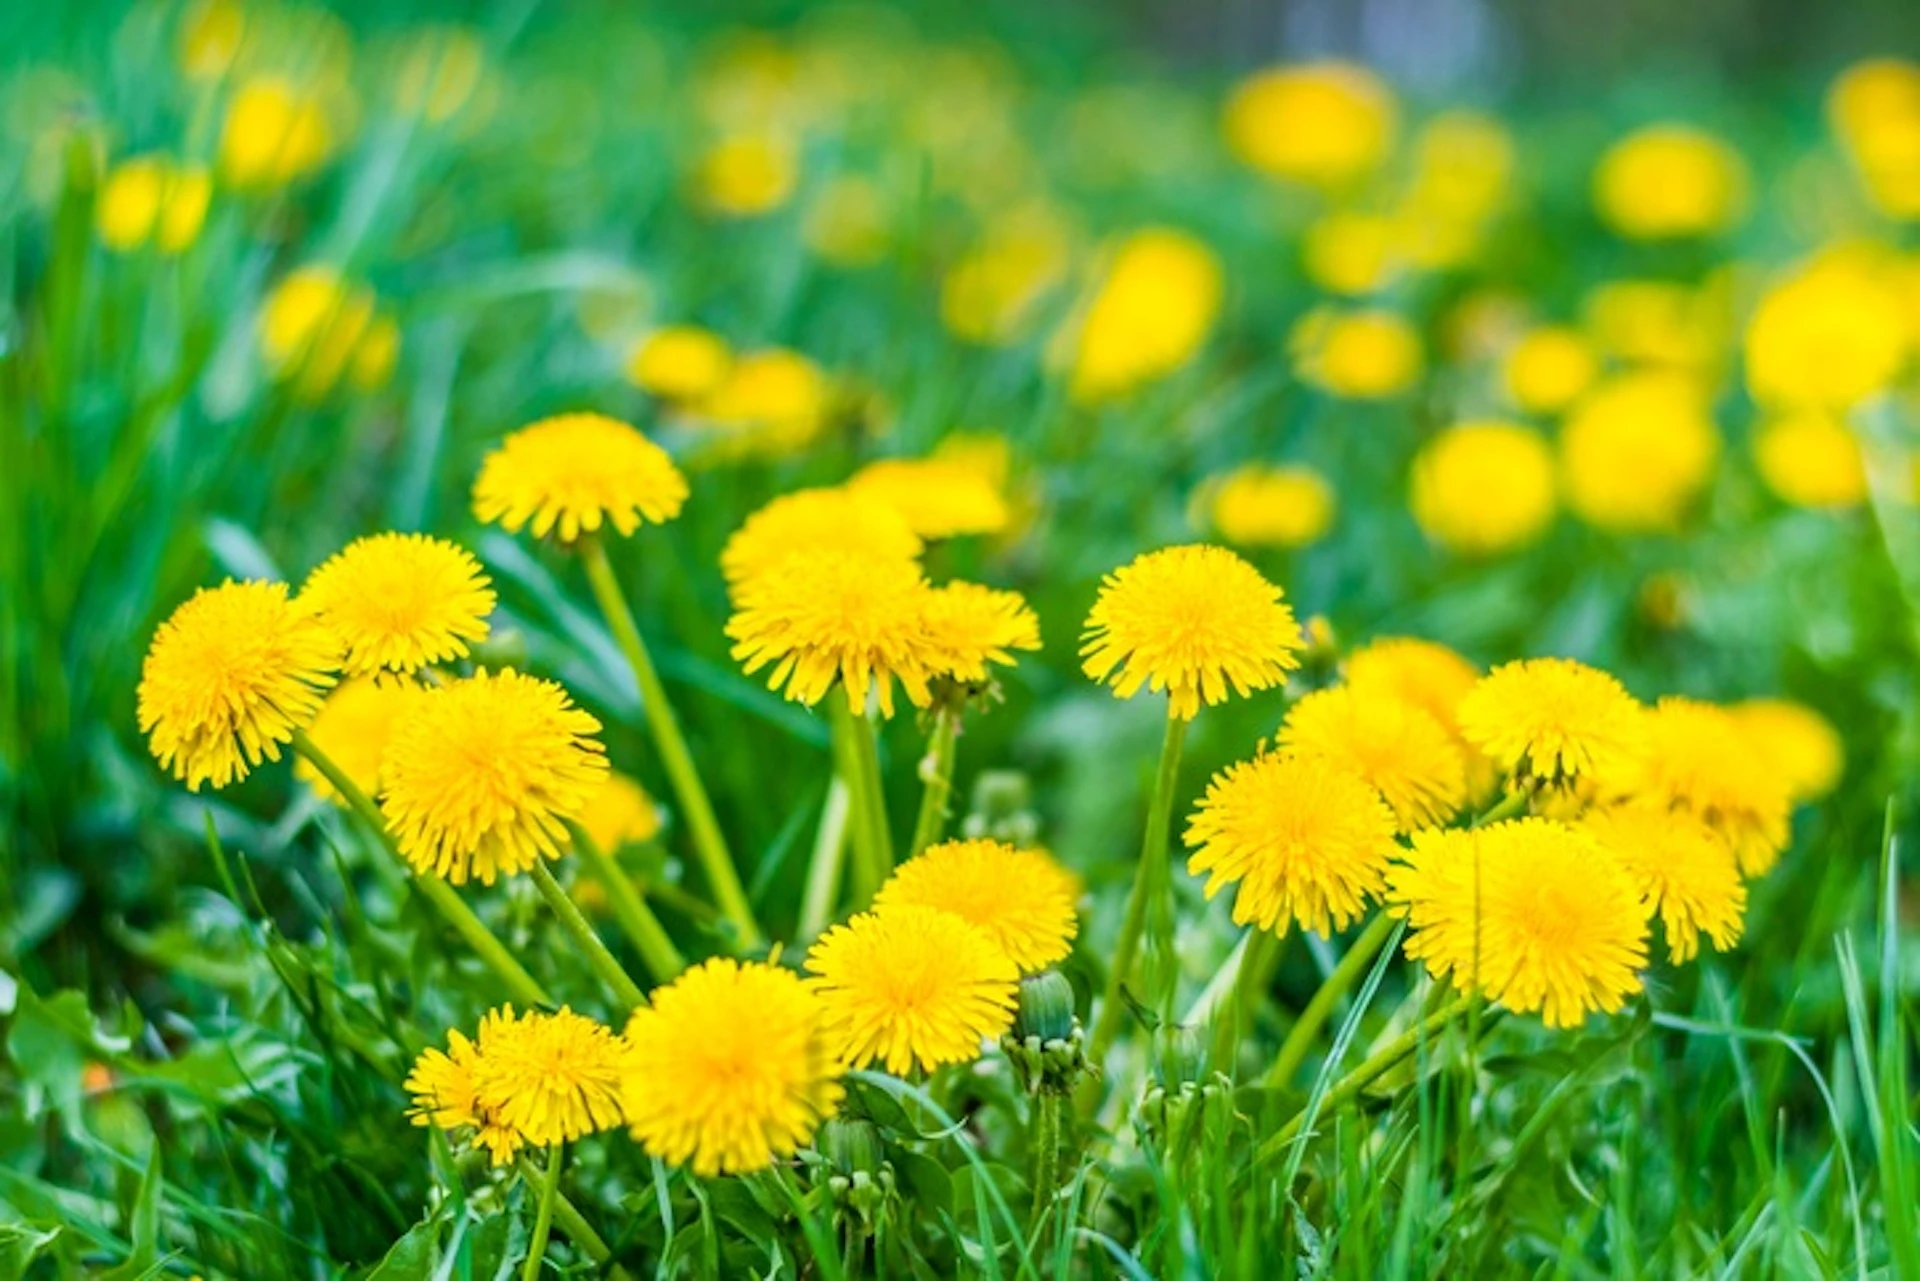 Here's why you shouldn't mow dandelions